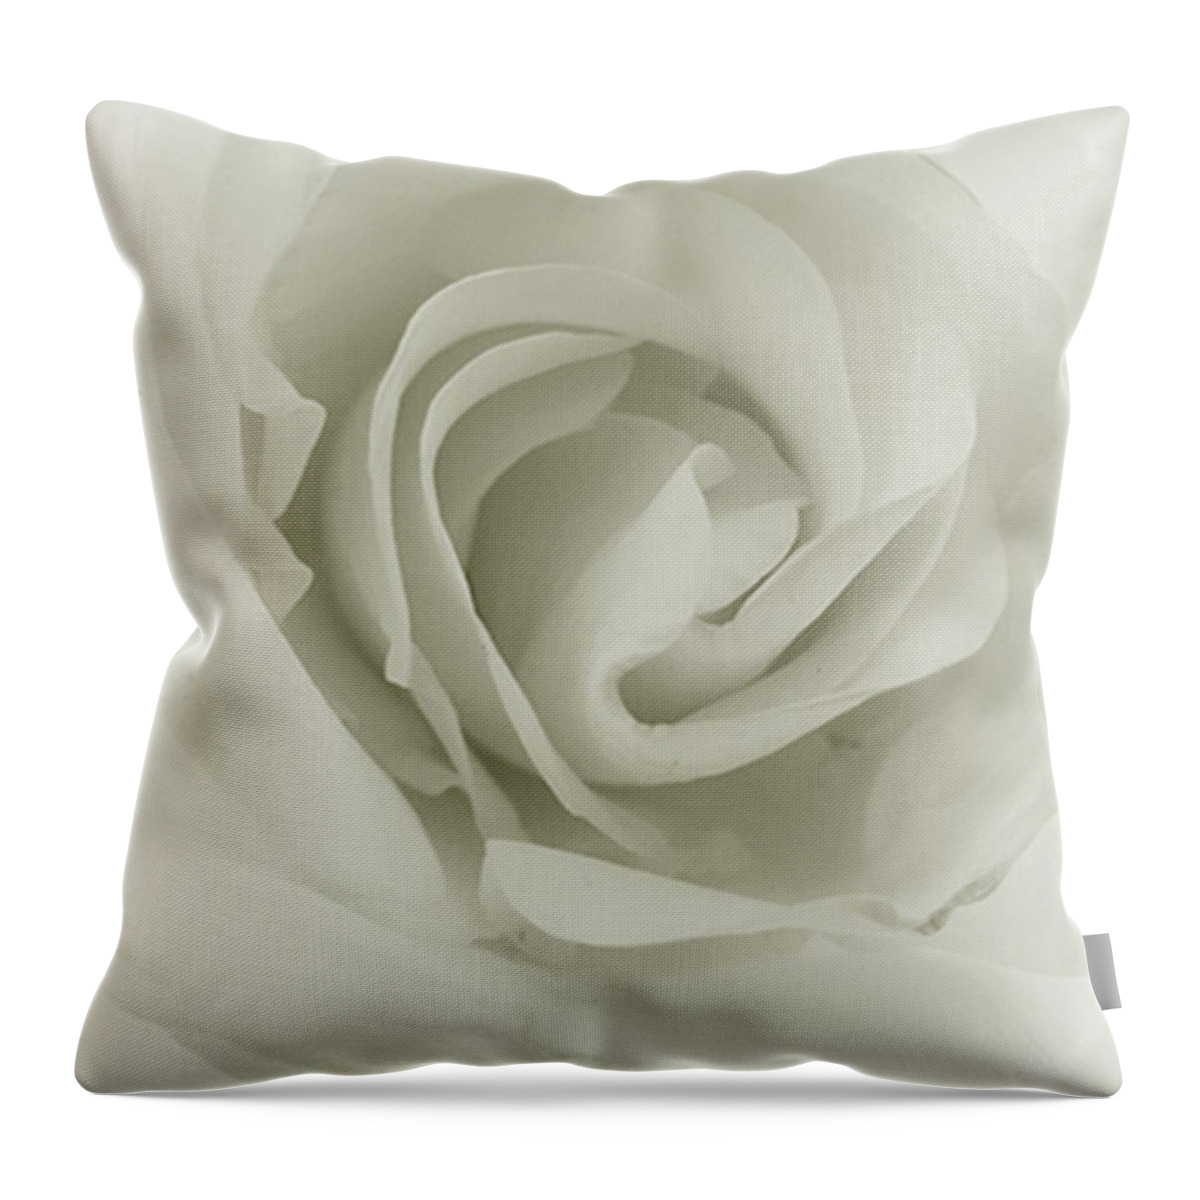 White Throw Pillow featuring the photograph Gentle by Michelle Hoffmann